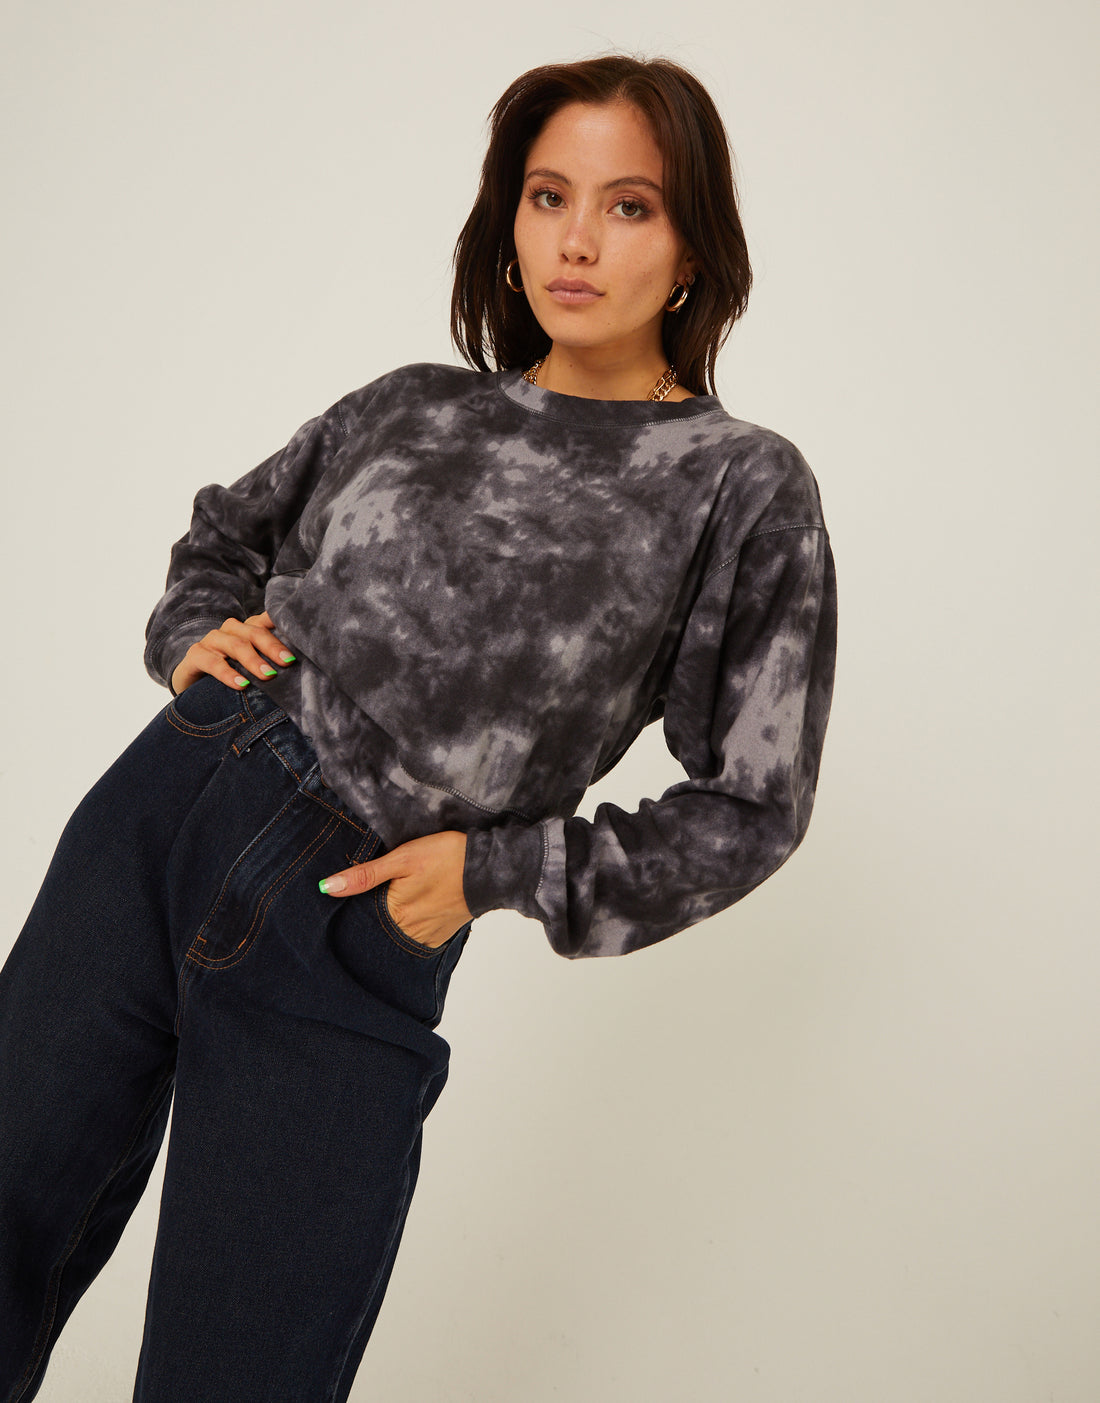 Brushed Knit Tie Dye Top Tops Charcoal Small -2020AVE